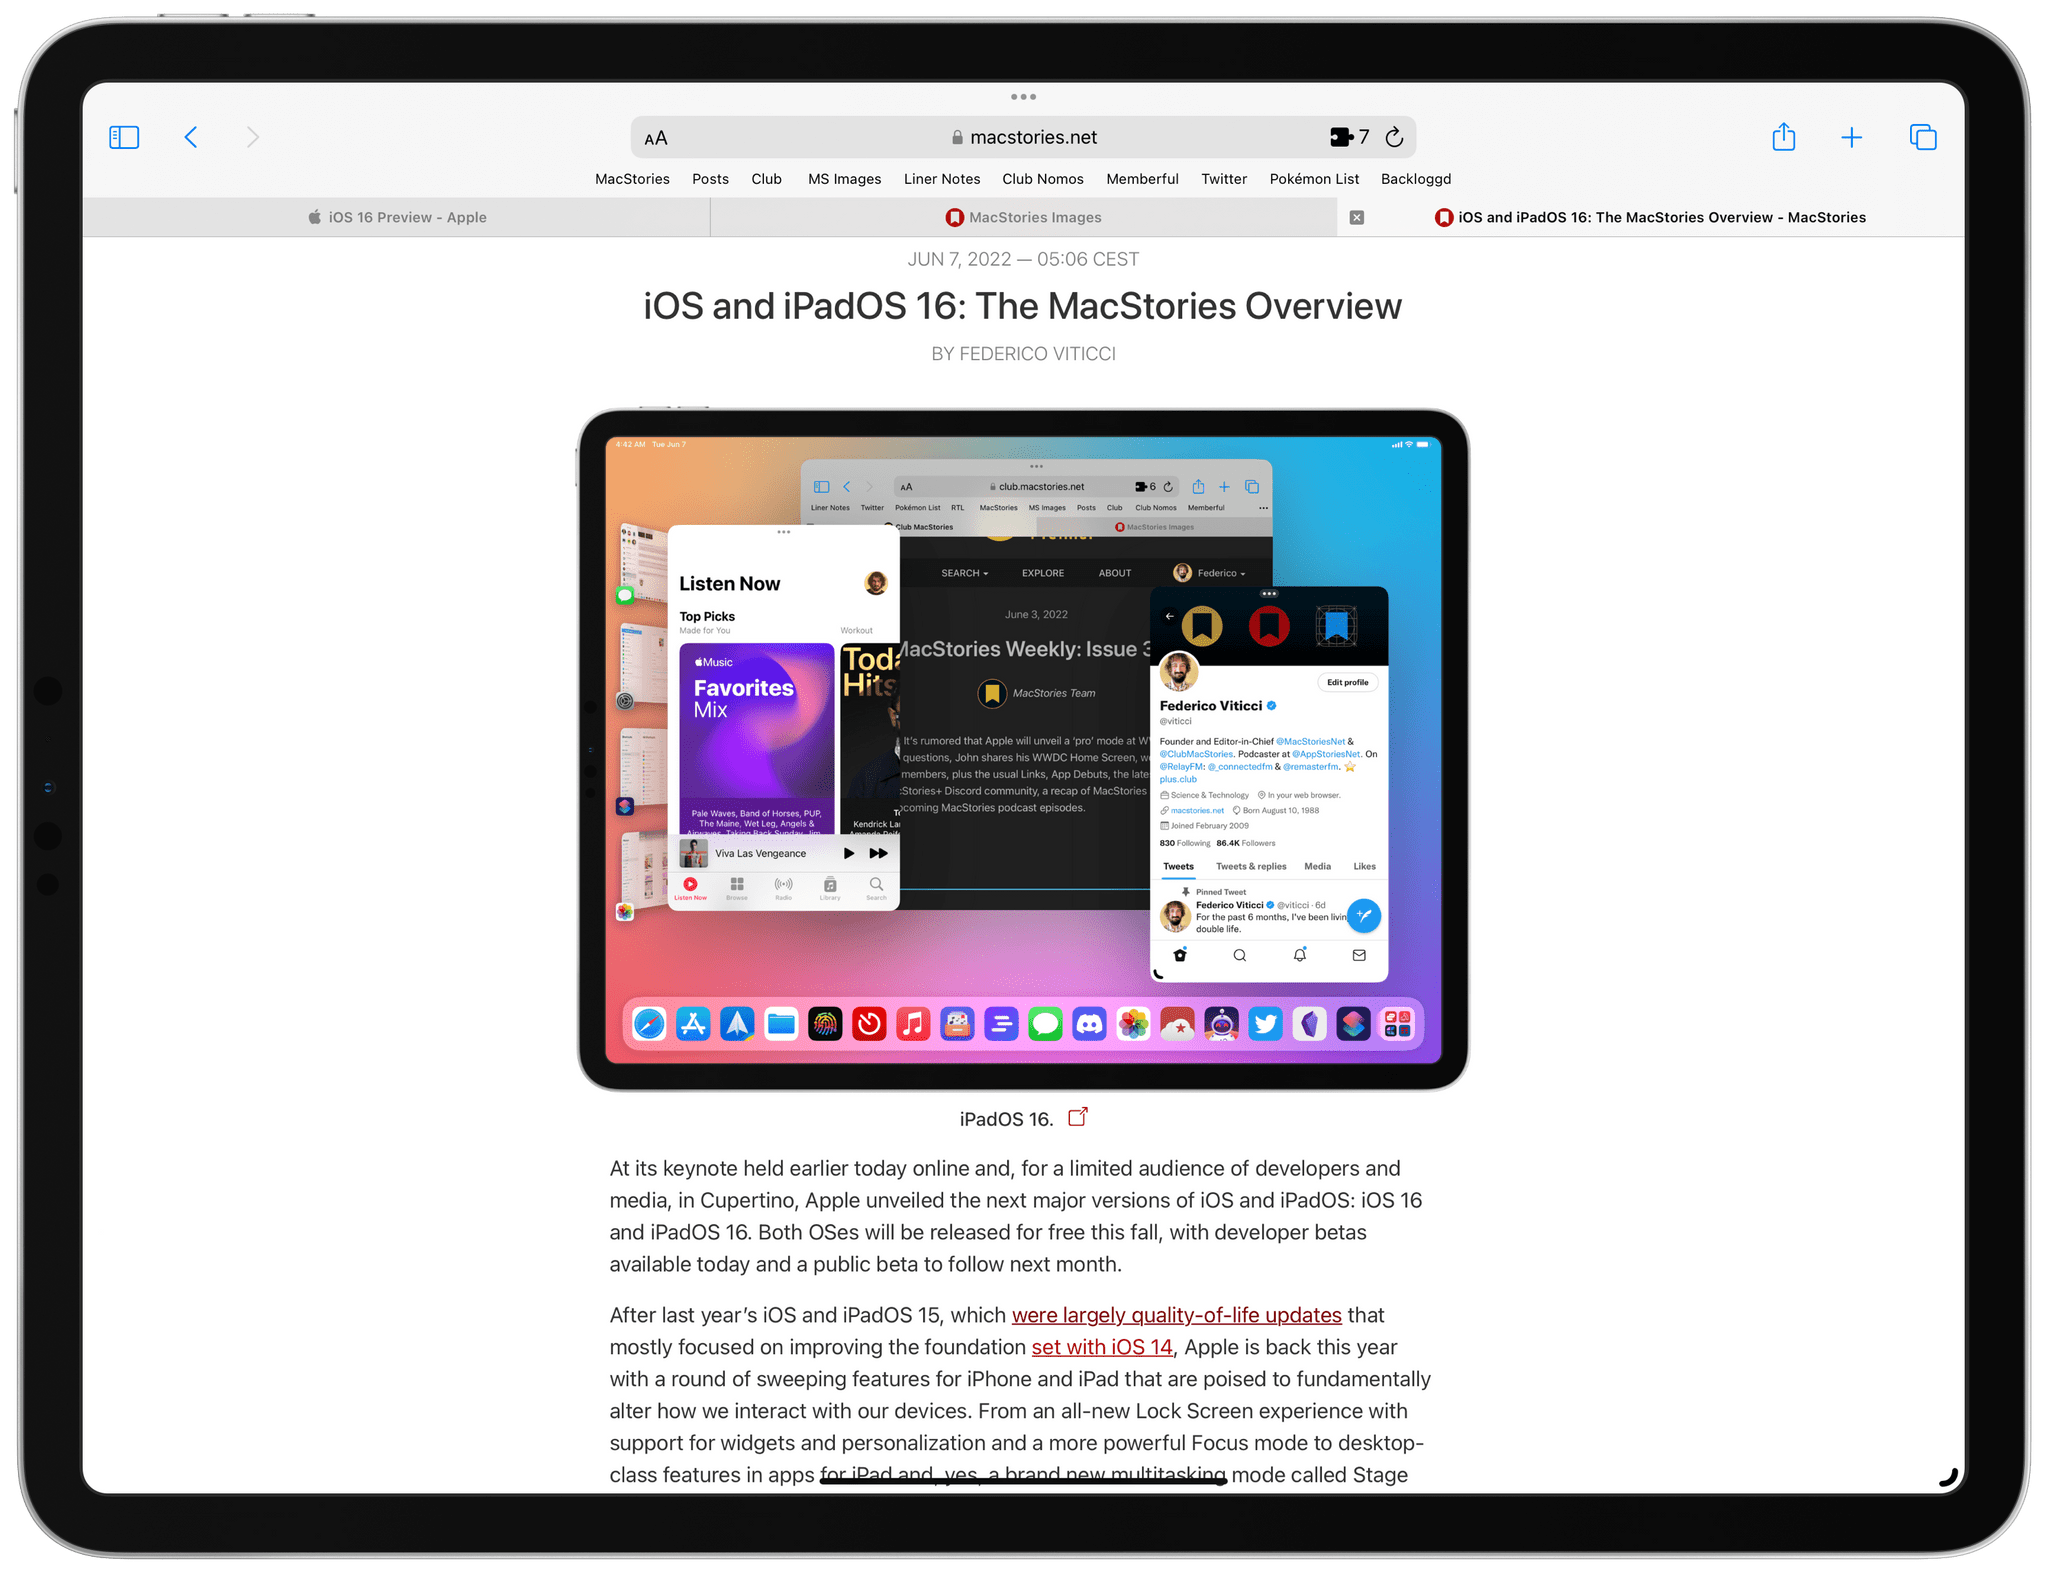 The new 'More Space' setting. You can see how everything is a bit smaller to fit more content onscreen at once. In this mode, the iPad Pro's virtual resolution goes from 2732x2048 to 3180x2384.